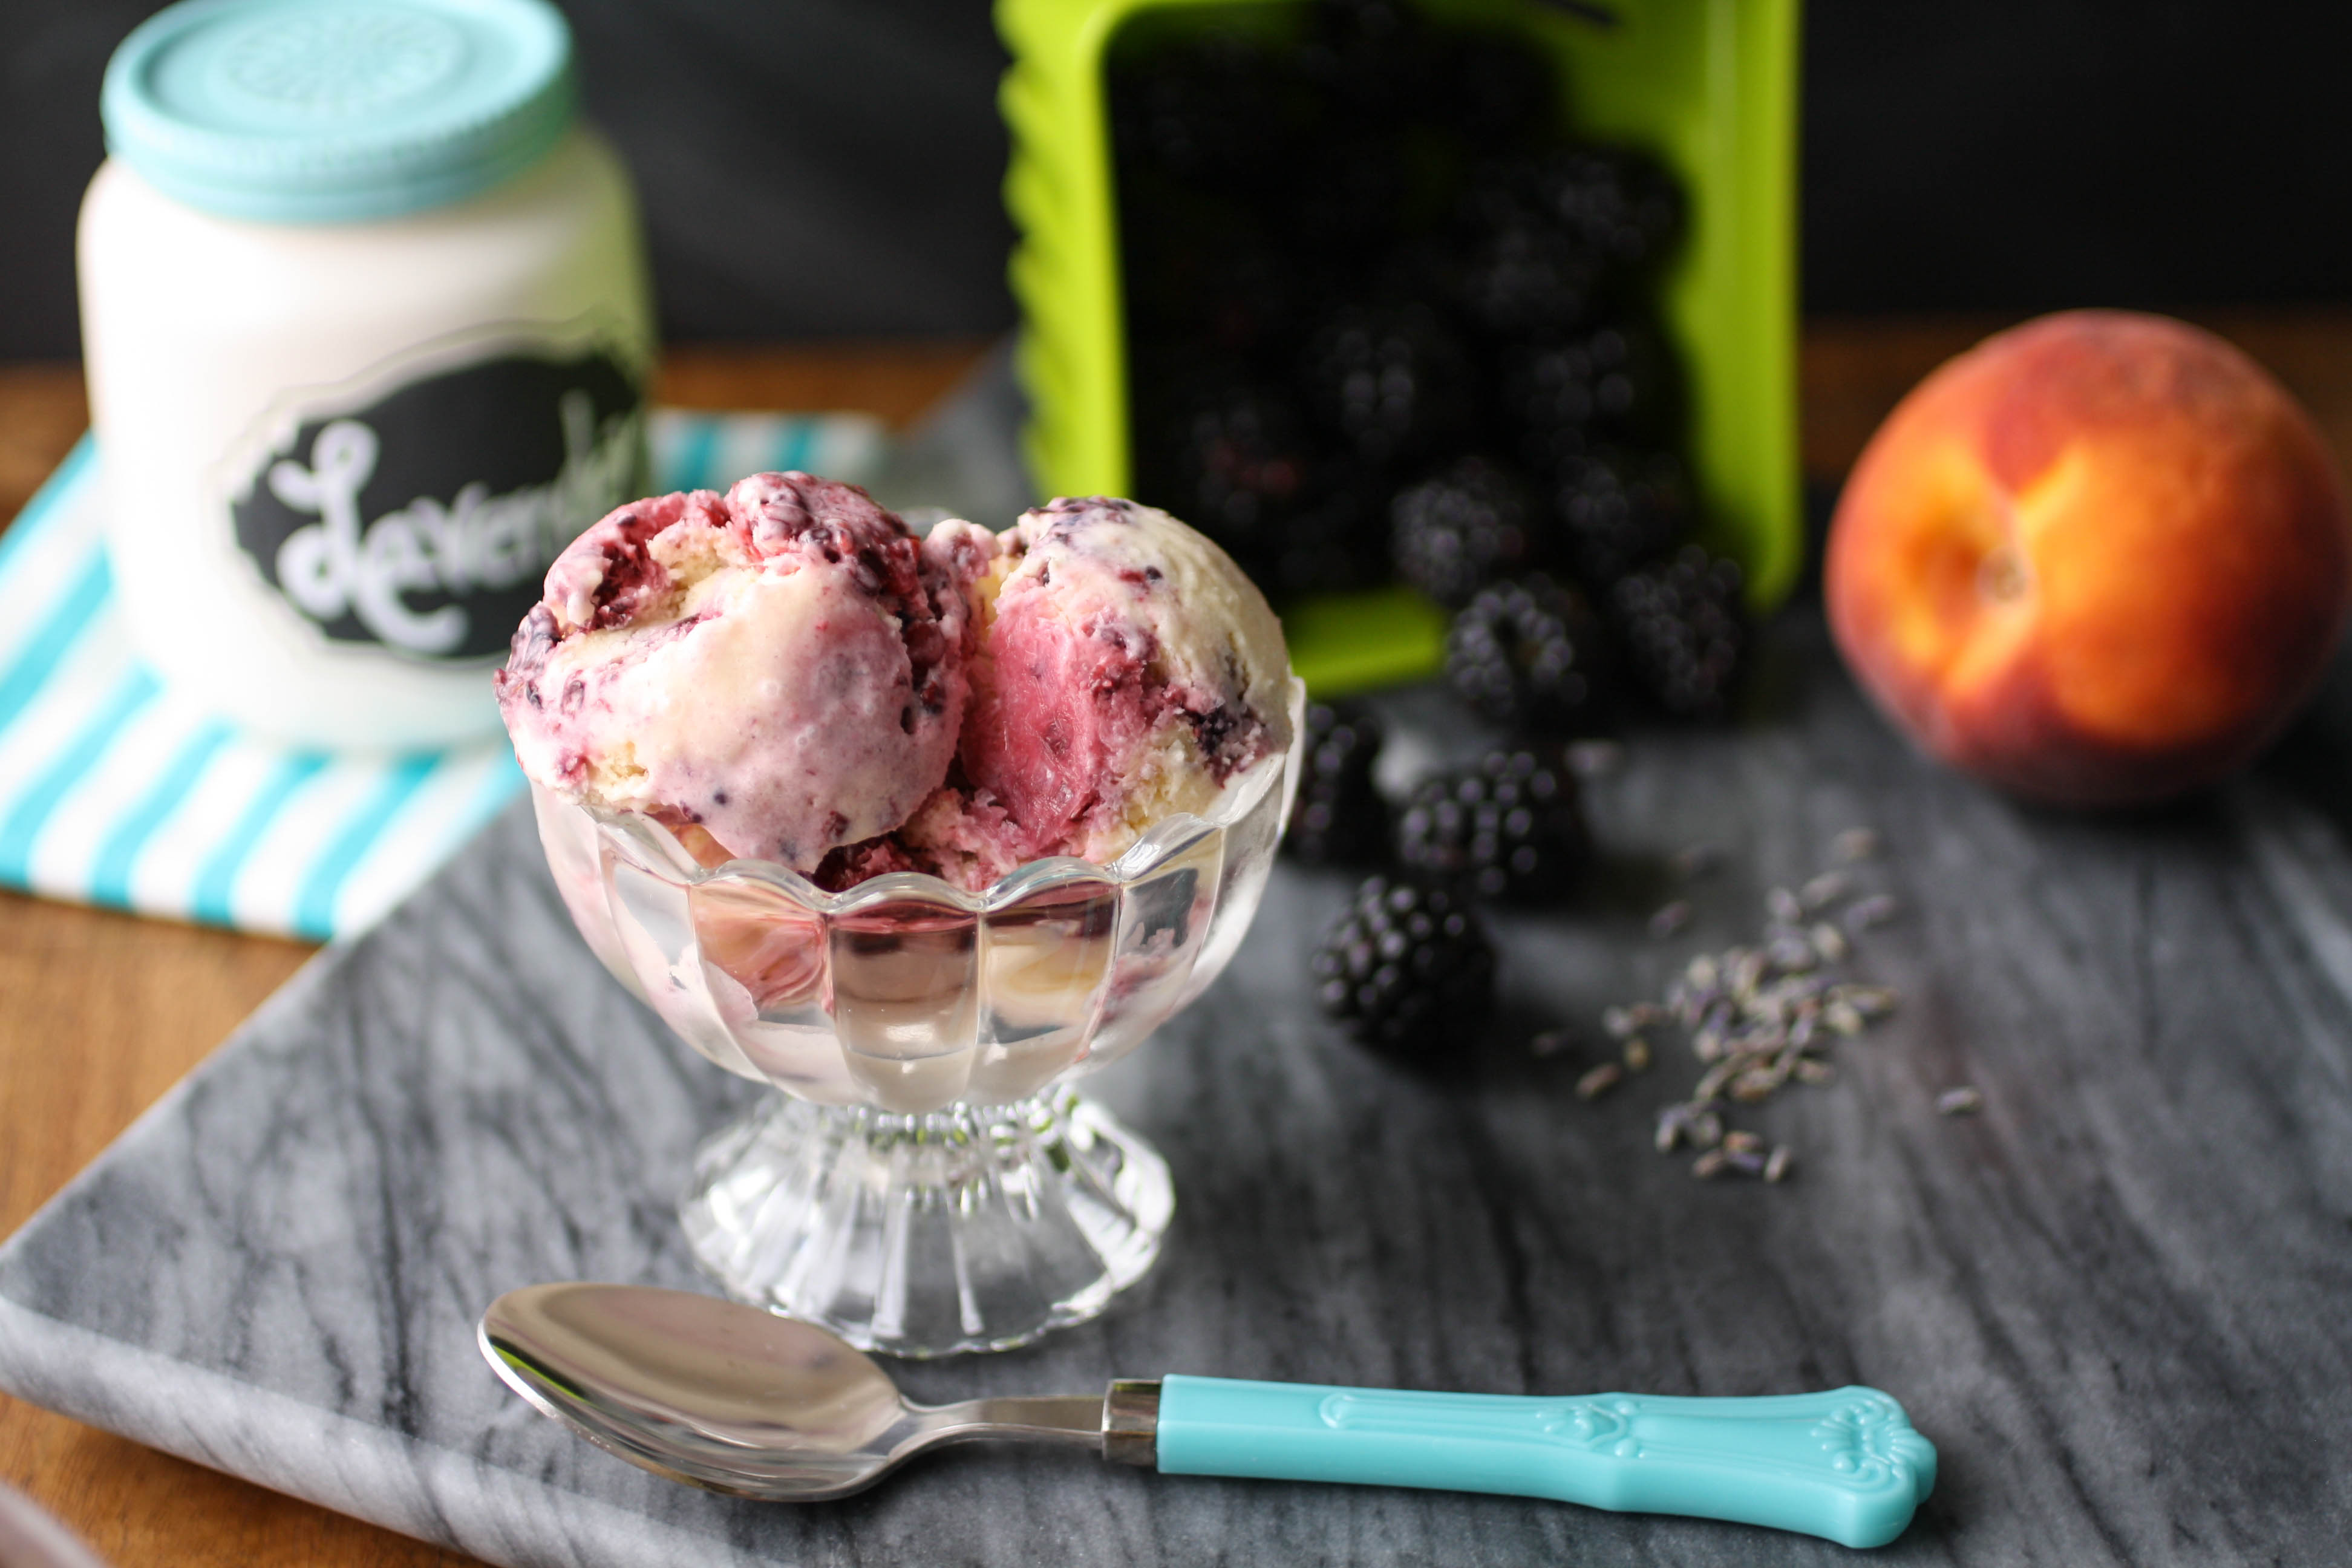 Peach, Lavender, and Blackberry Ice Cream is a favorite treat for the summer. Peach, Lavender, and Blackberry Ice Cream makes dessert time delicious!